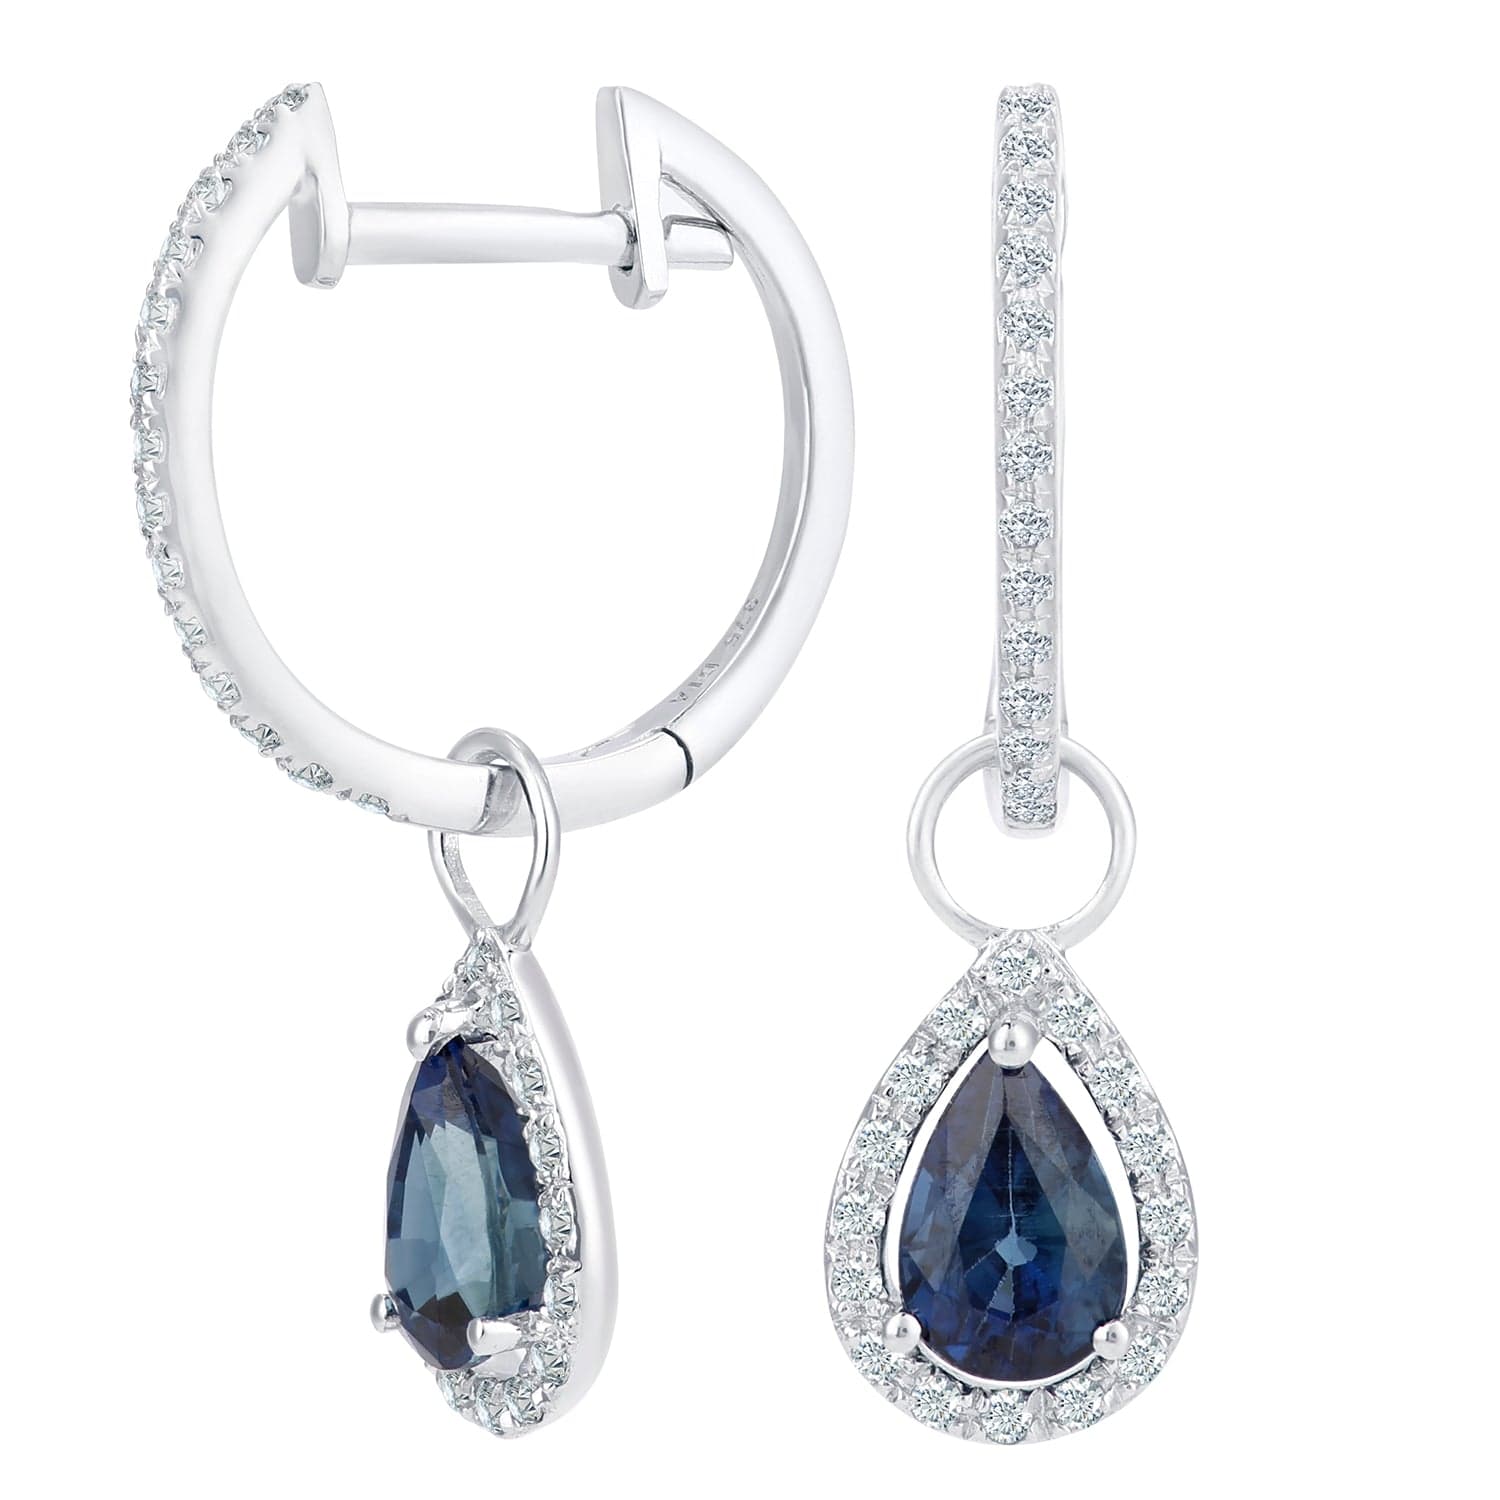 Lynora Luxe Earring White Gold 9ct / Sapphire 9ct White Gold Sapphire Teardrop Diamond Earrings